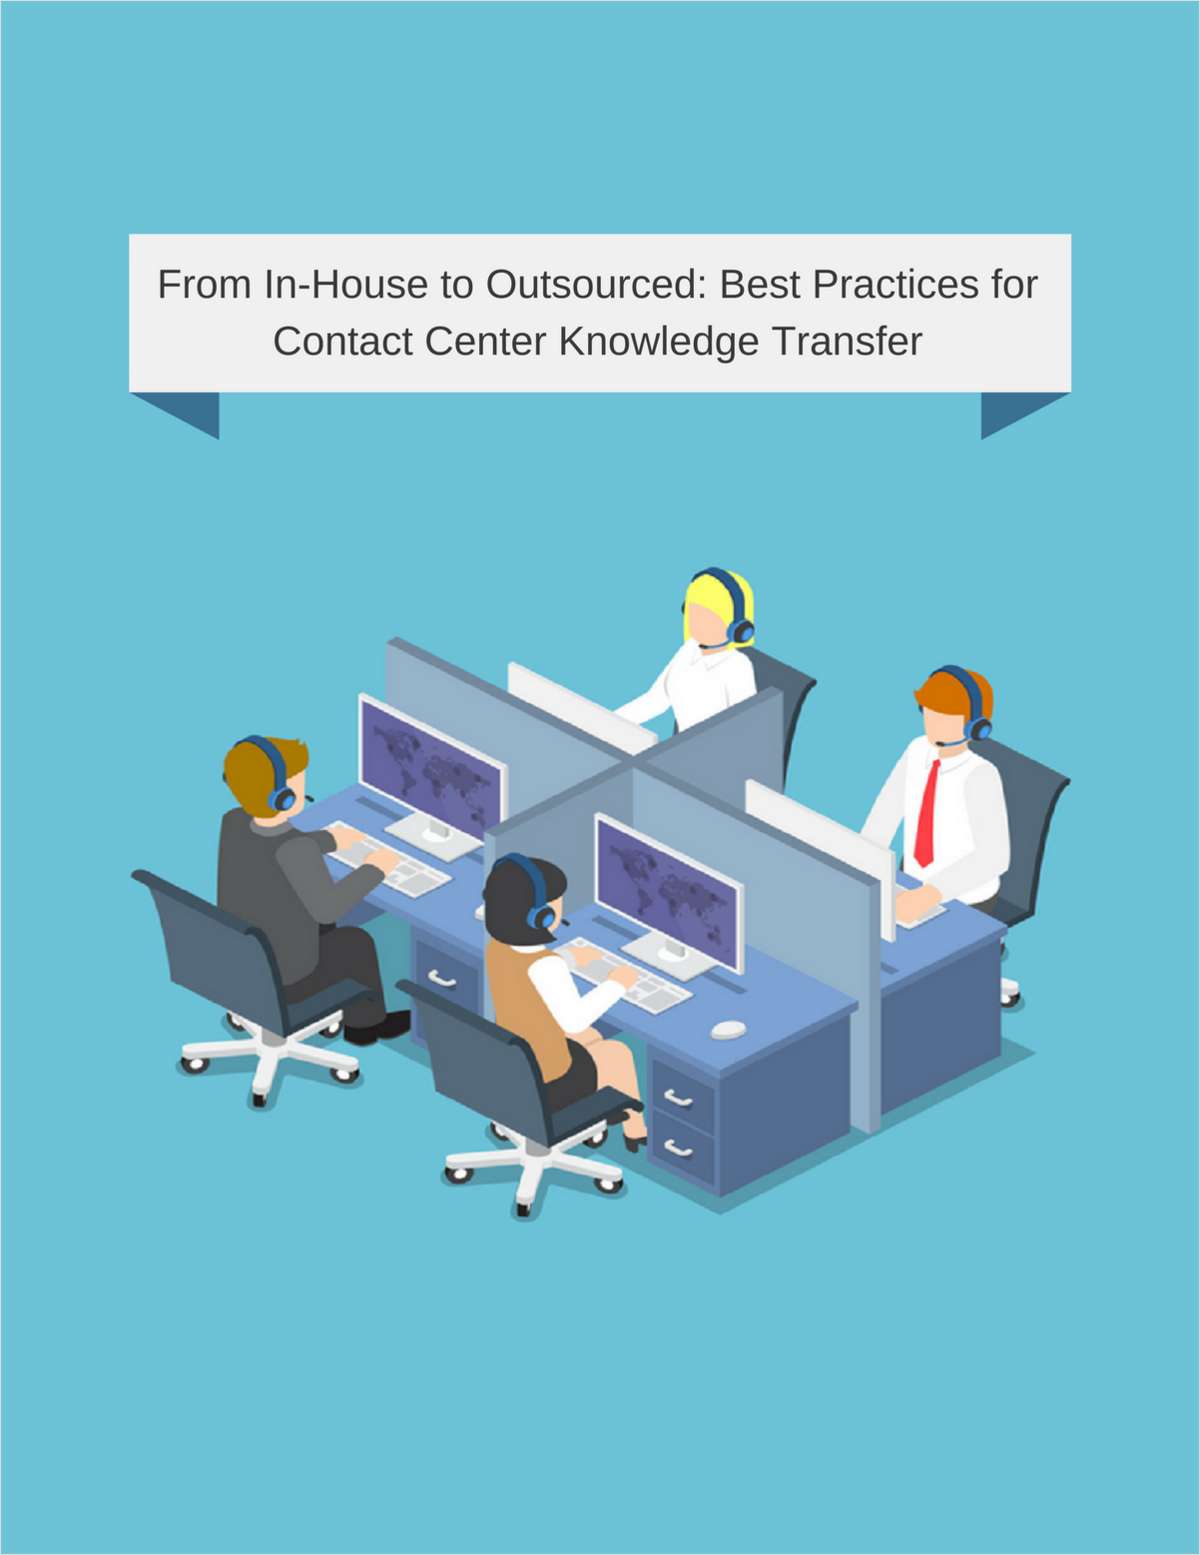 From In-House to Outsourced: Best Practices for Contact Center Knowledge Transfer